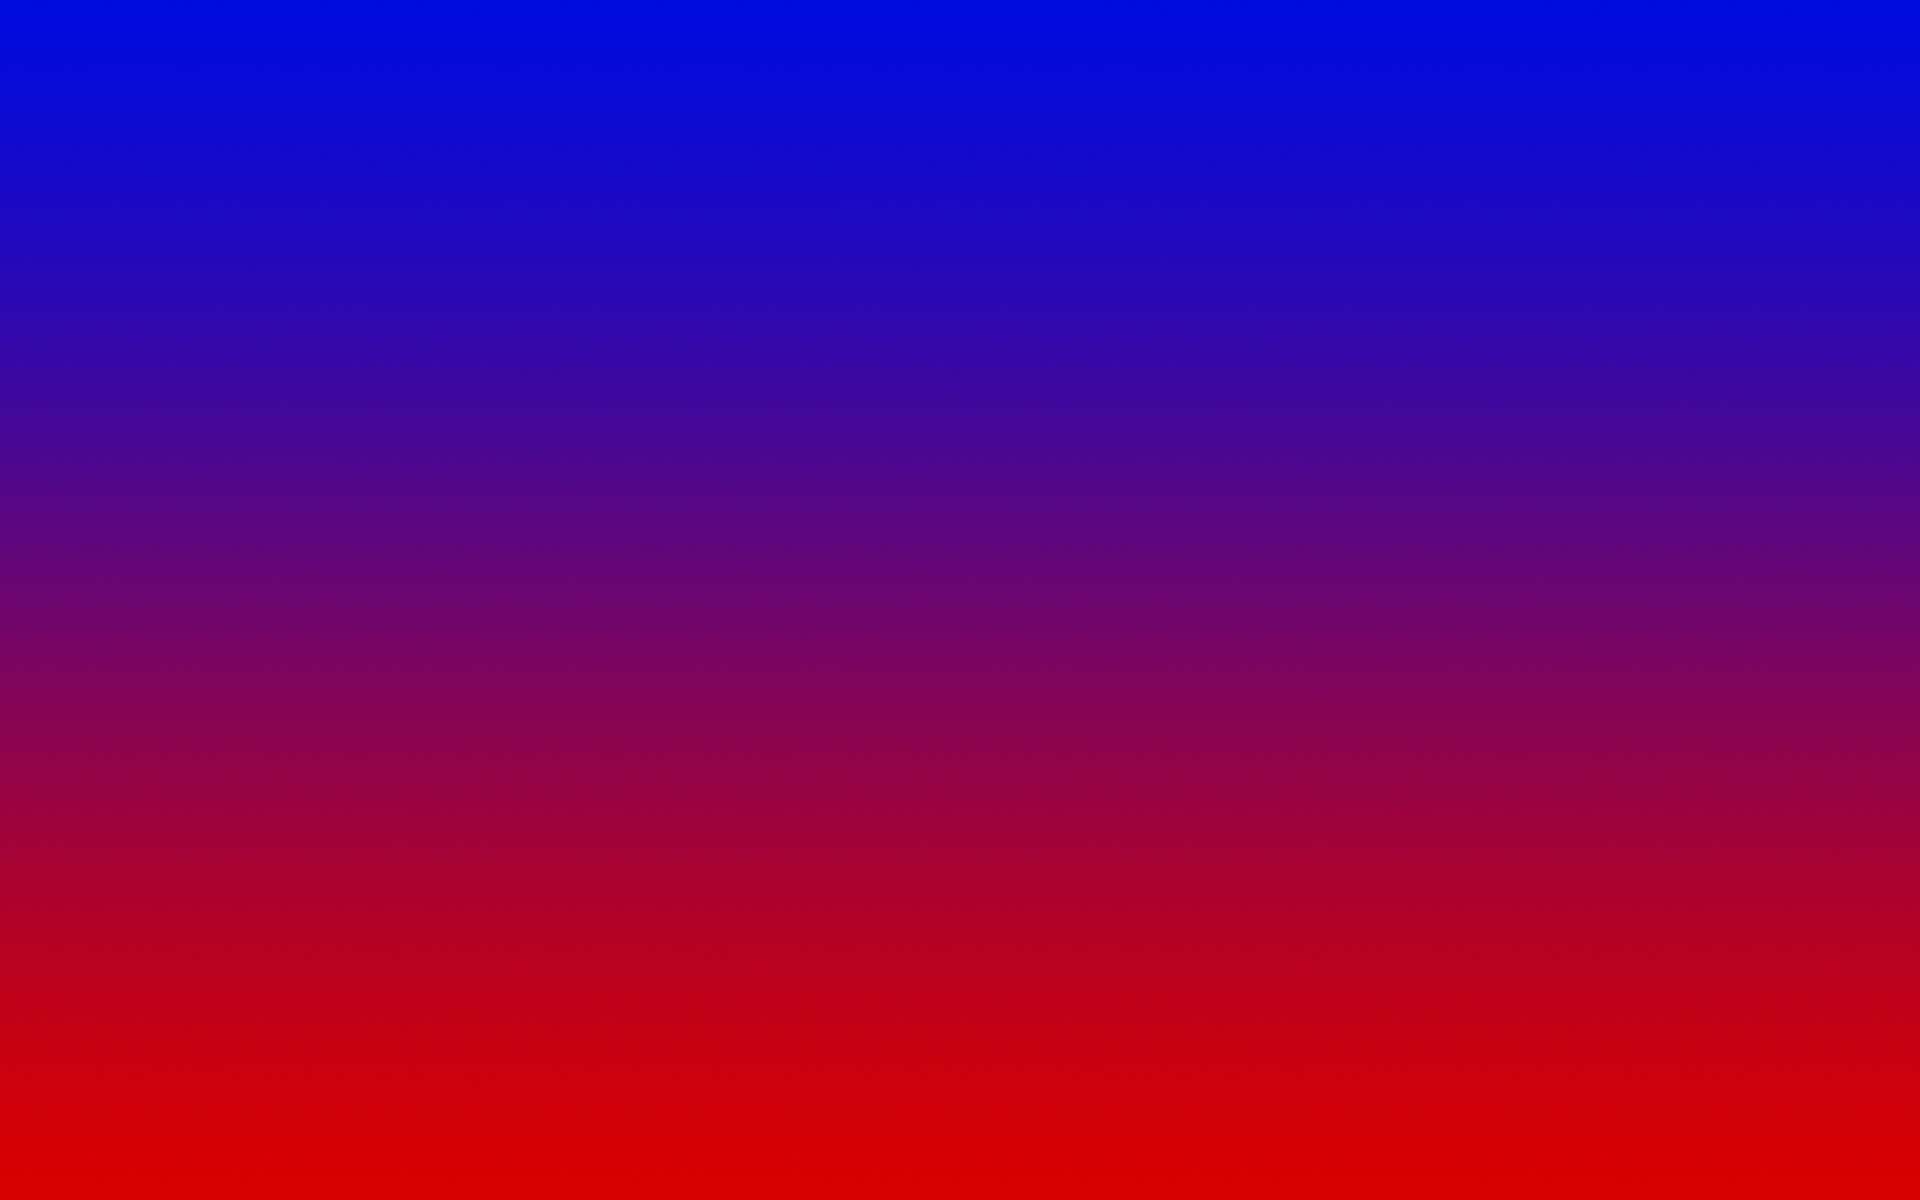 1920x1200 Blue and Red Gradient Wallpaper 58835